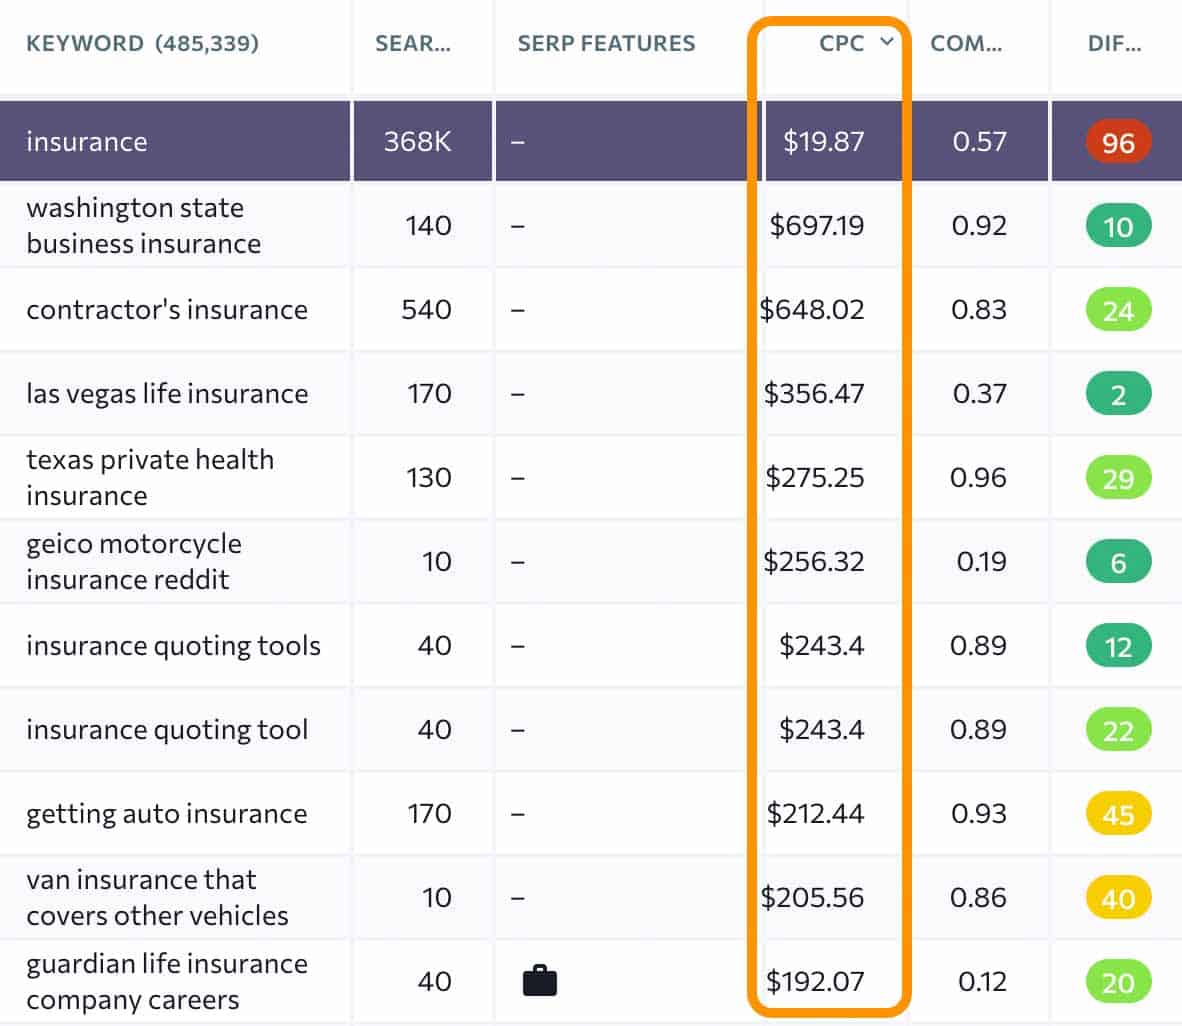 Top Paying Keywords For The Insurance Niche